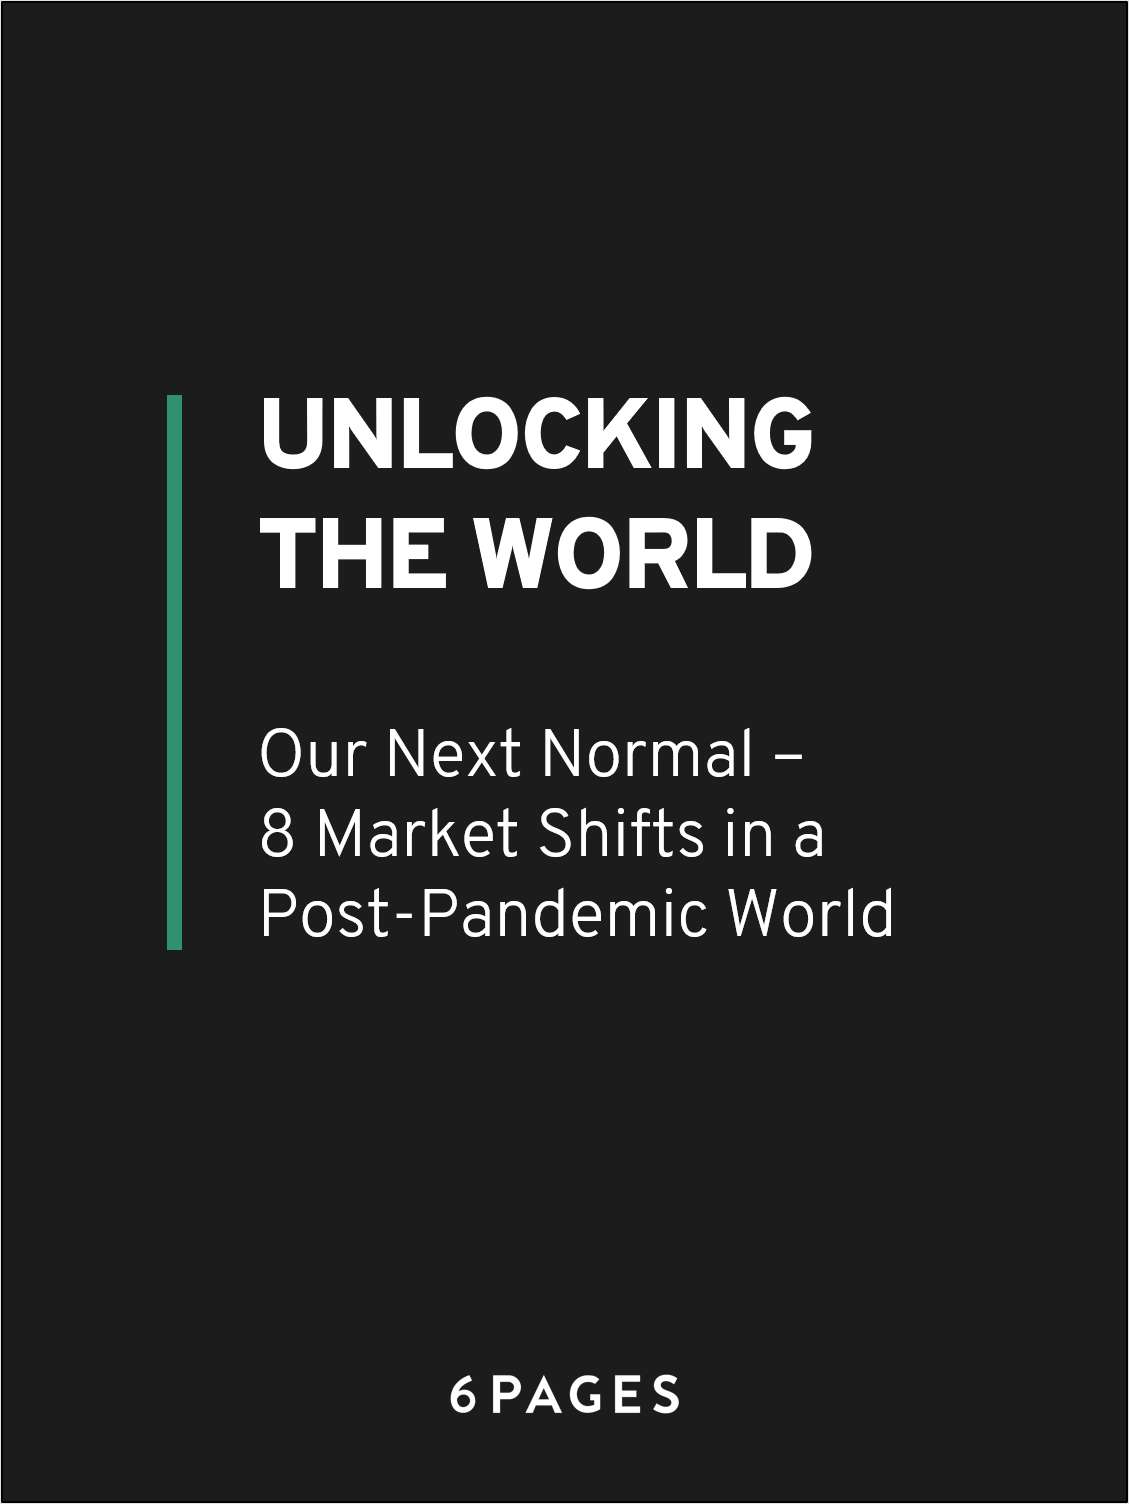 Special Edition: Unlocking the world -- what will our 'next normal' look like?